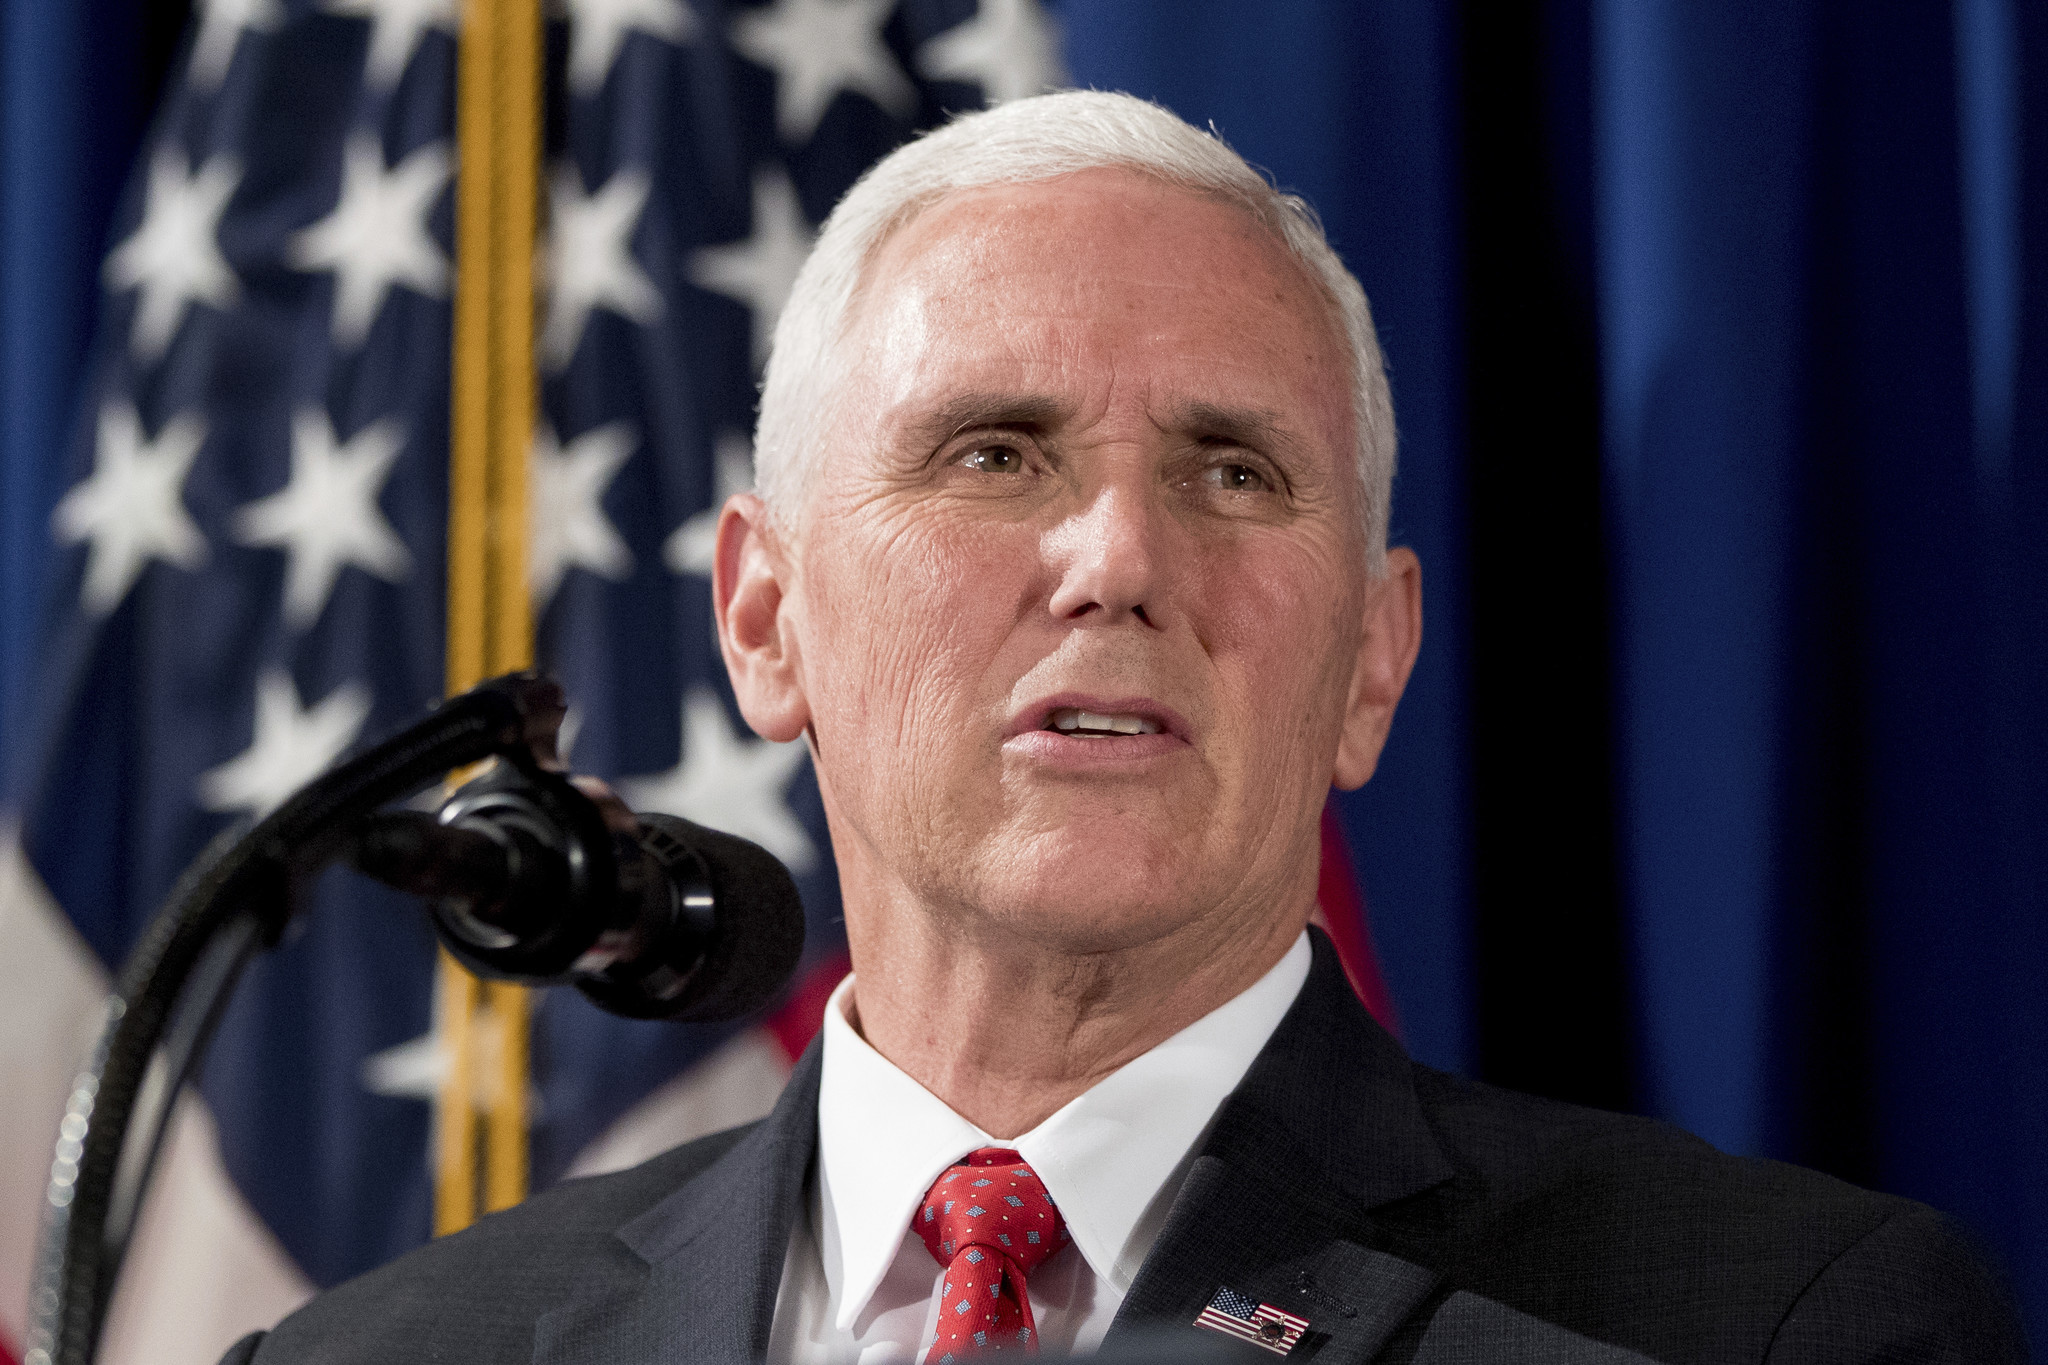 Indiana faces records request backlog as Pence drags feet on his emails